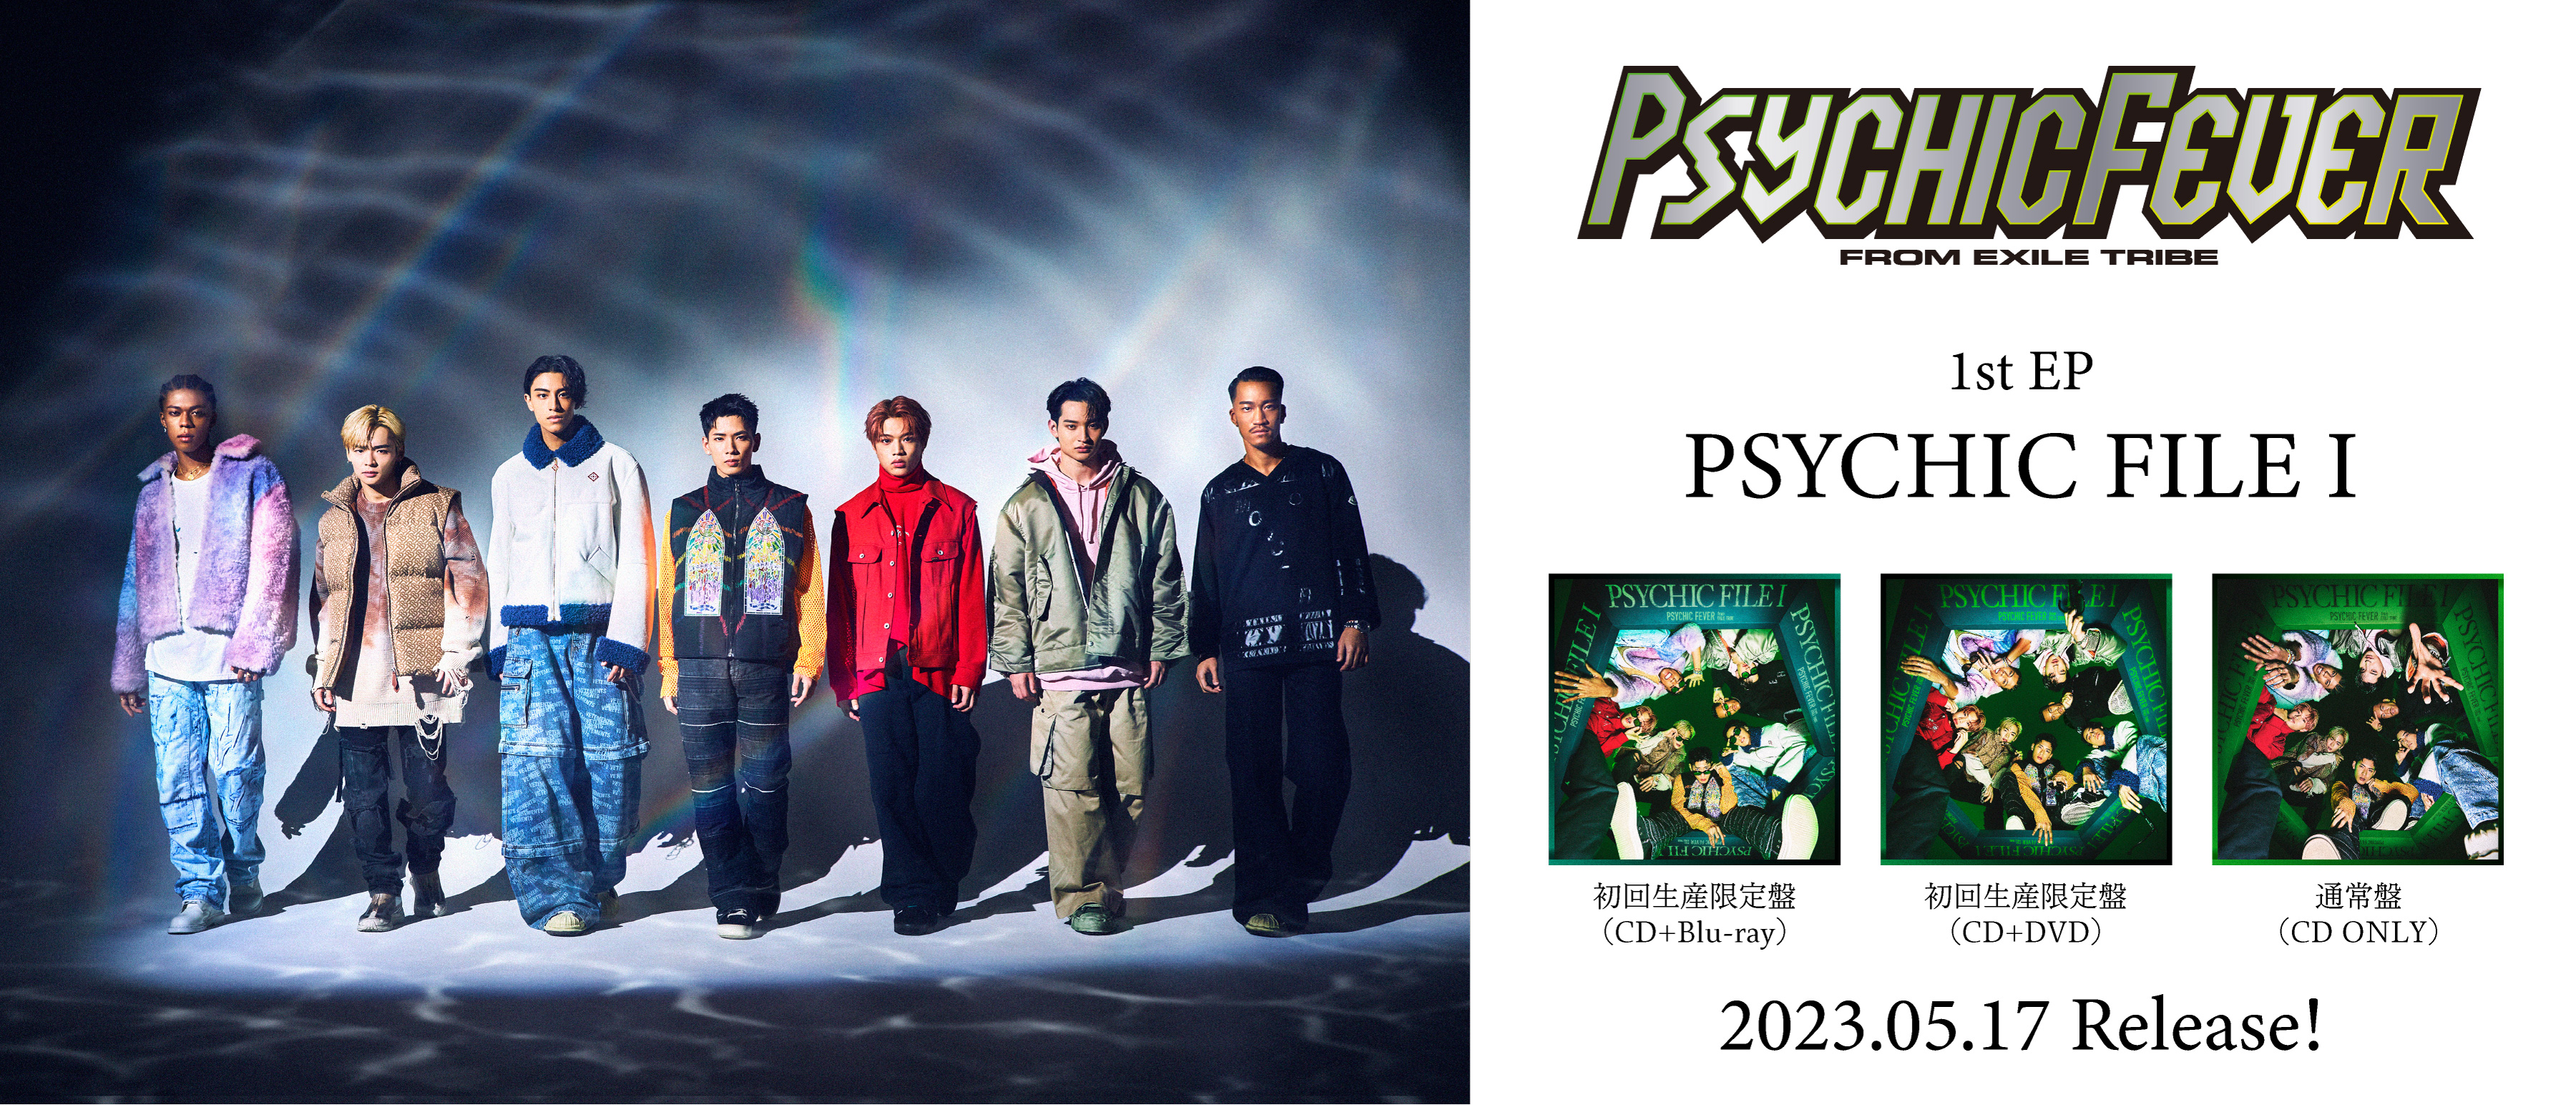 PSYCHIC FEVER from EXILE TRIBE 『PSYCHIC FILE Ⅰ』